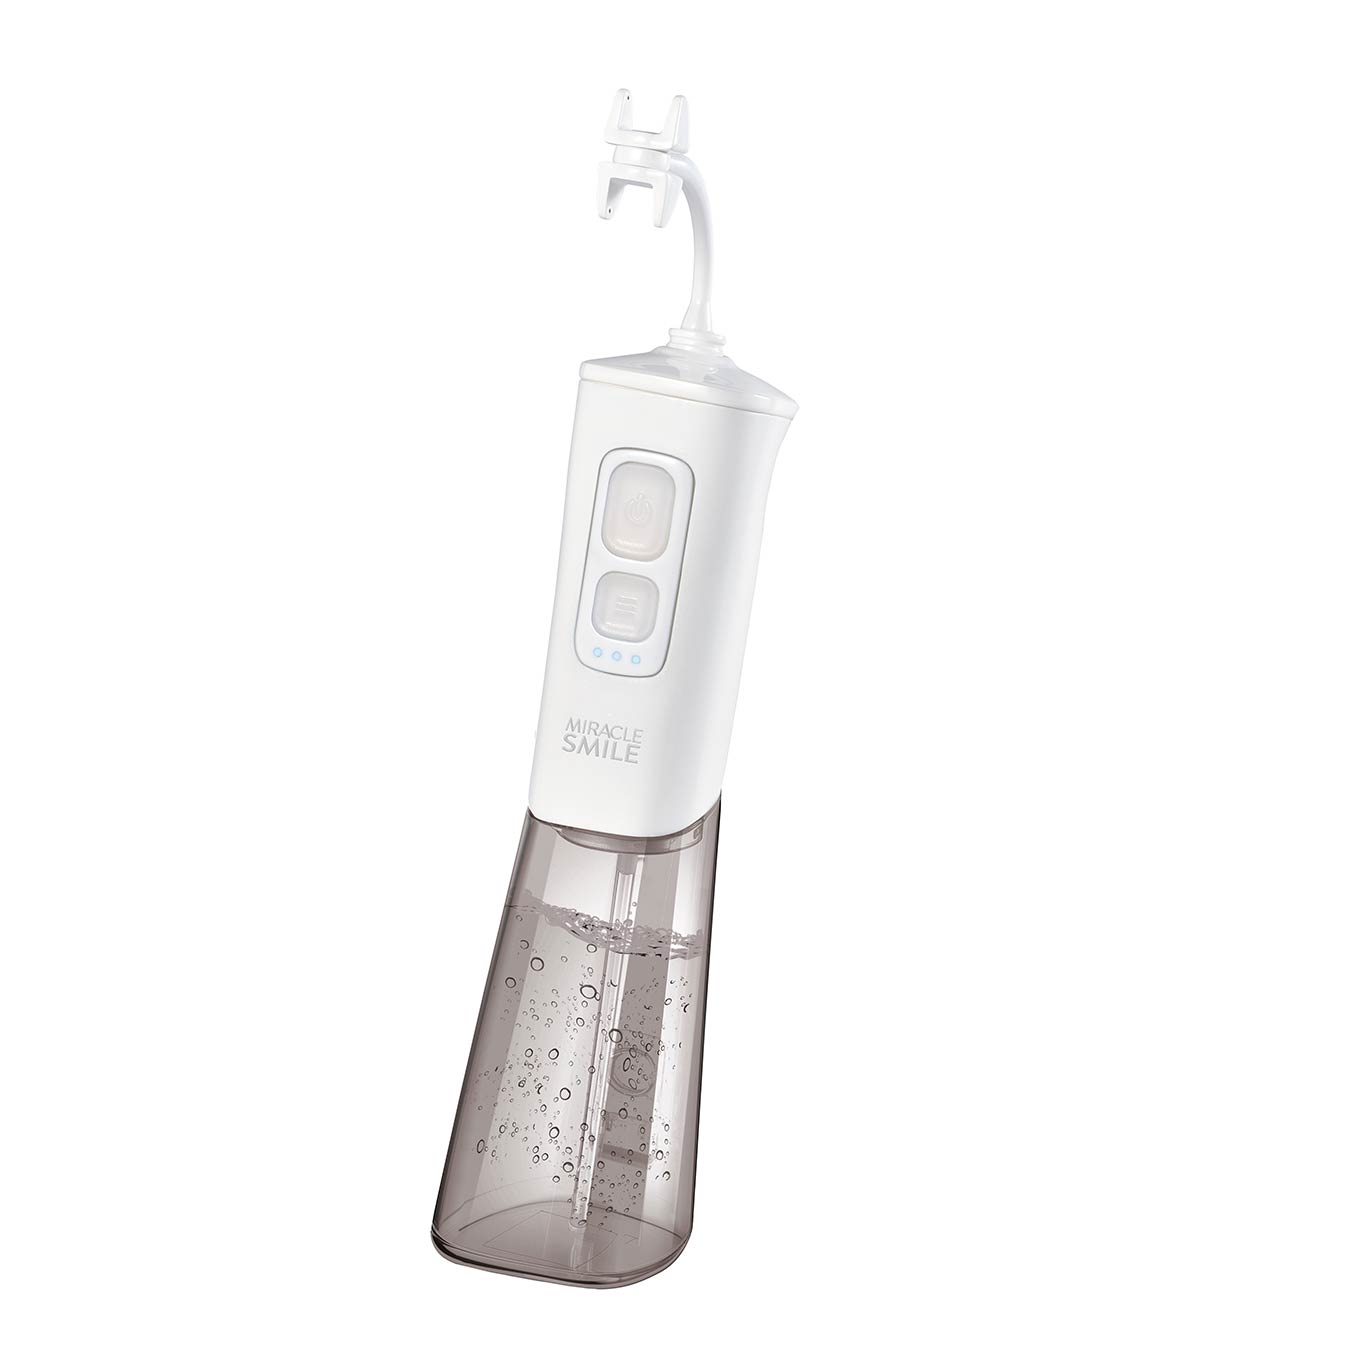 View Miracle Smile Cordless Water Flosser information